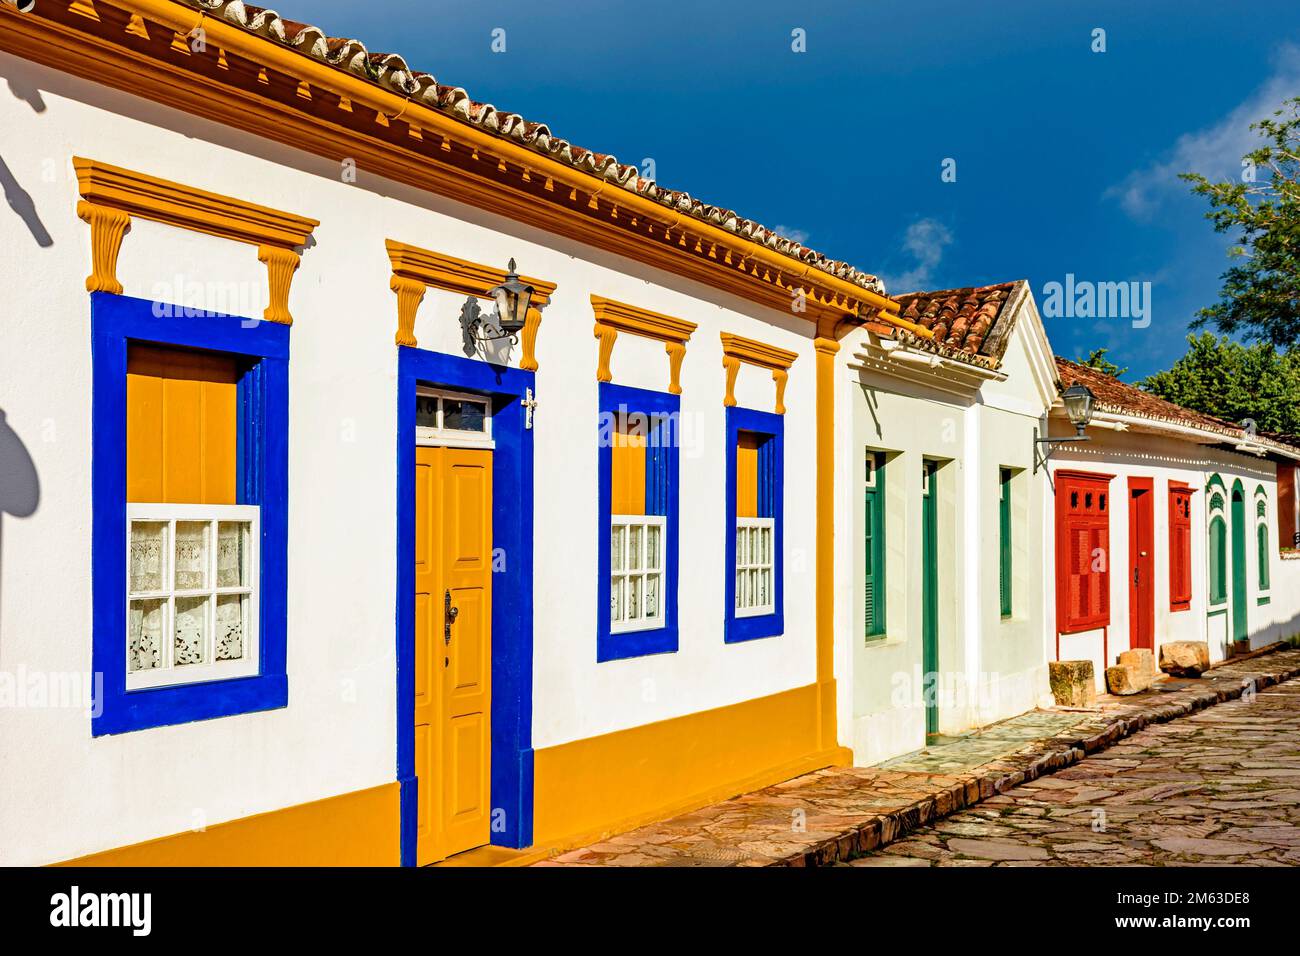 Cobblestone street with old colonial style houses in the city of Tiradentes, Minas Gerais. Stock Photo